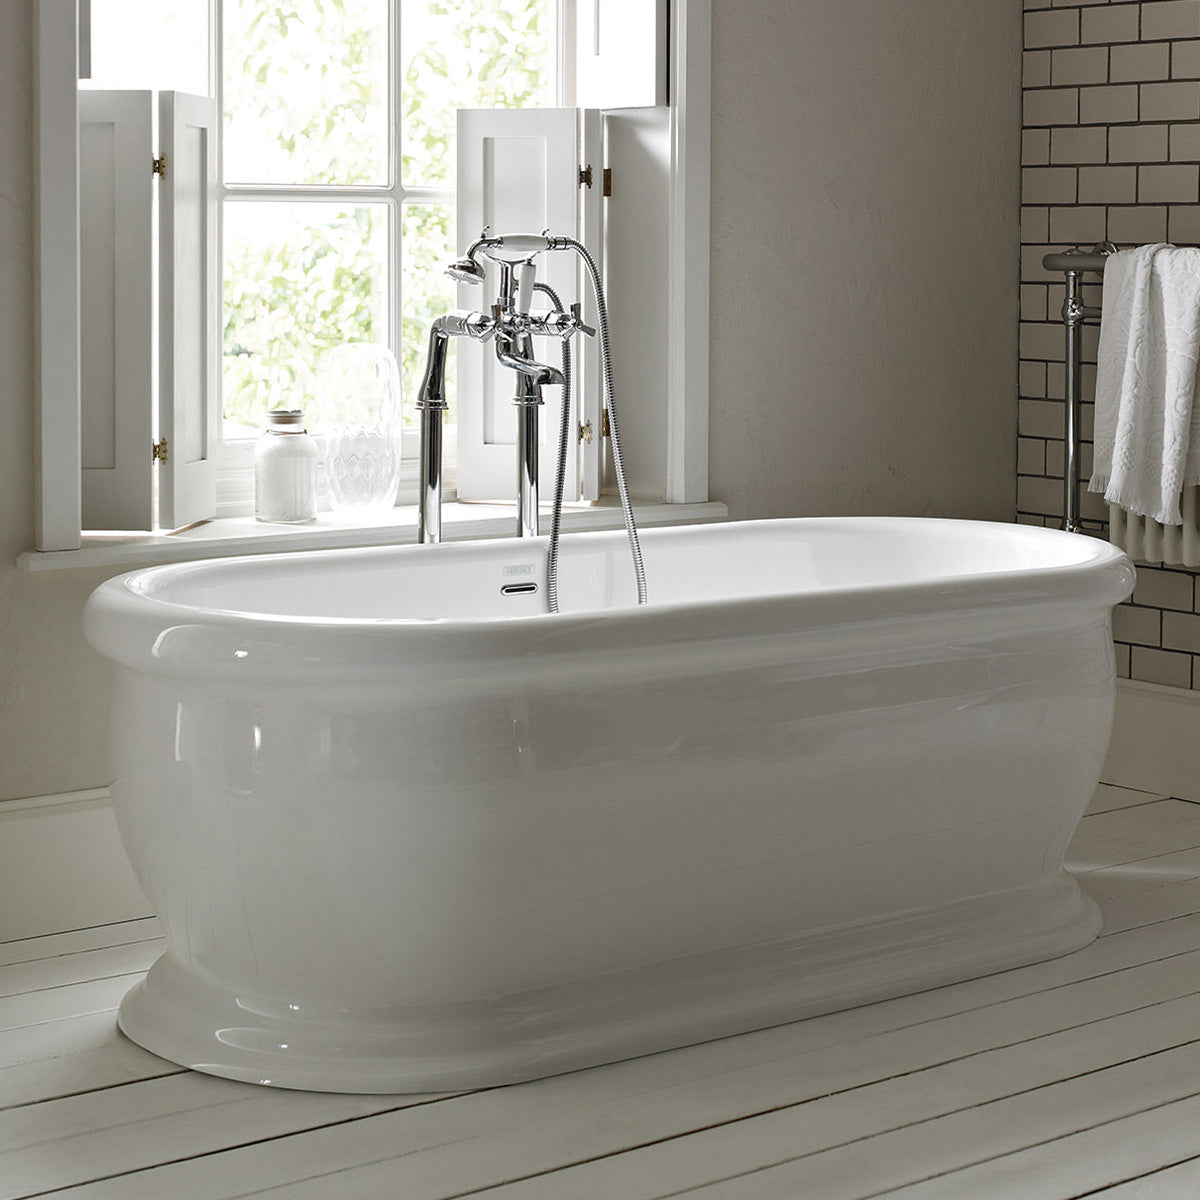 Heritage Derrymore 1745mm Roll Top Freestanding Double-Ended Bath